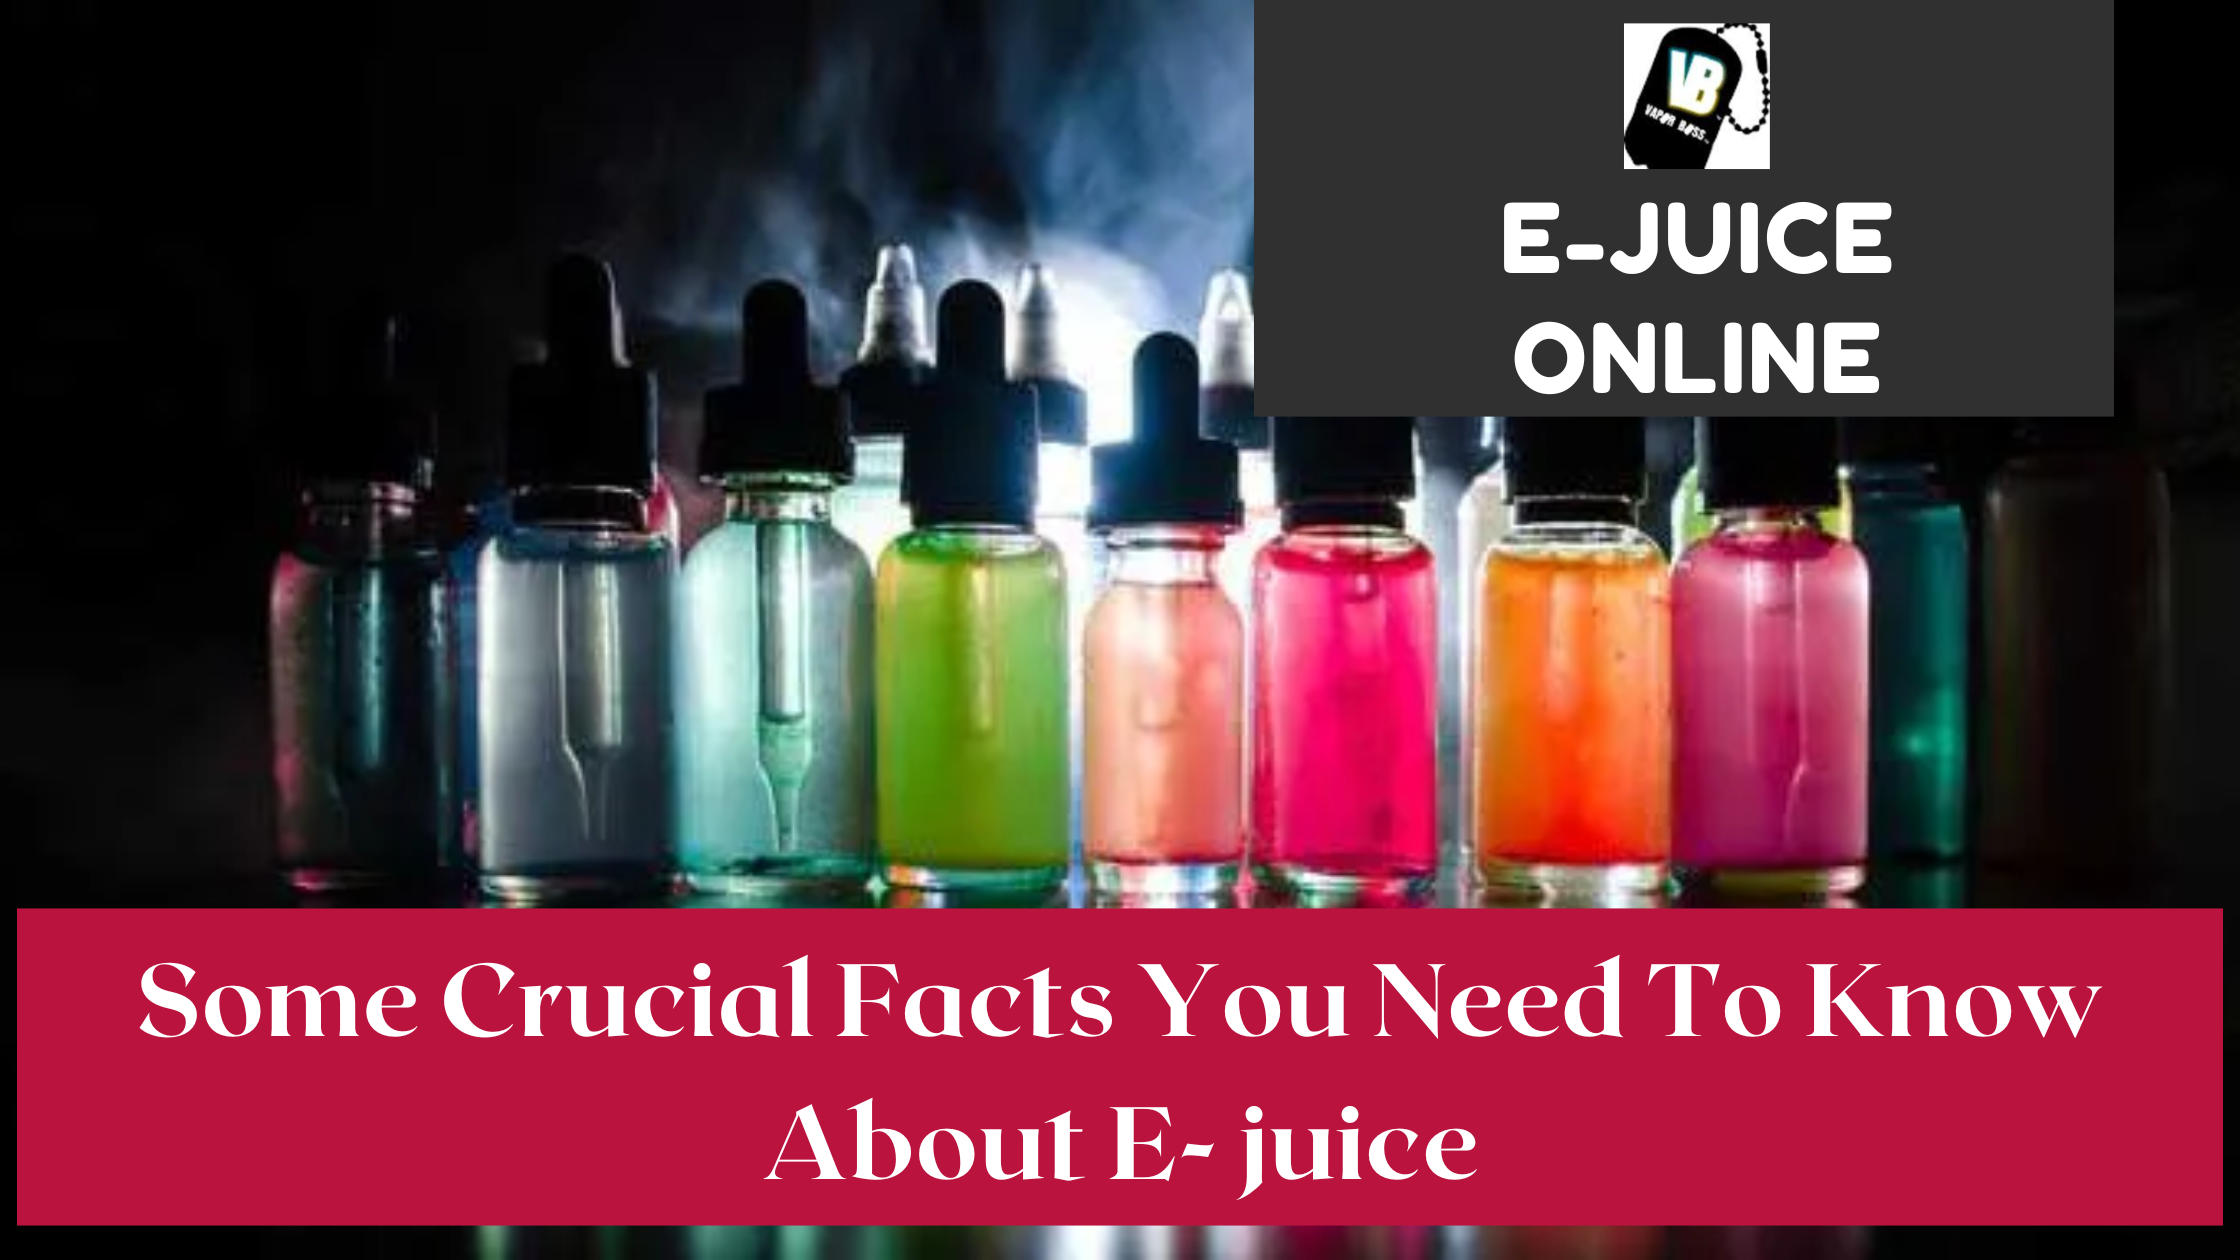 Some Crucial Facts You Need To Know About E- juice